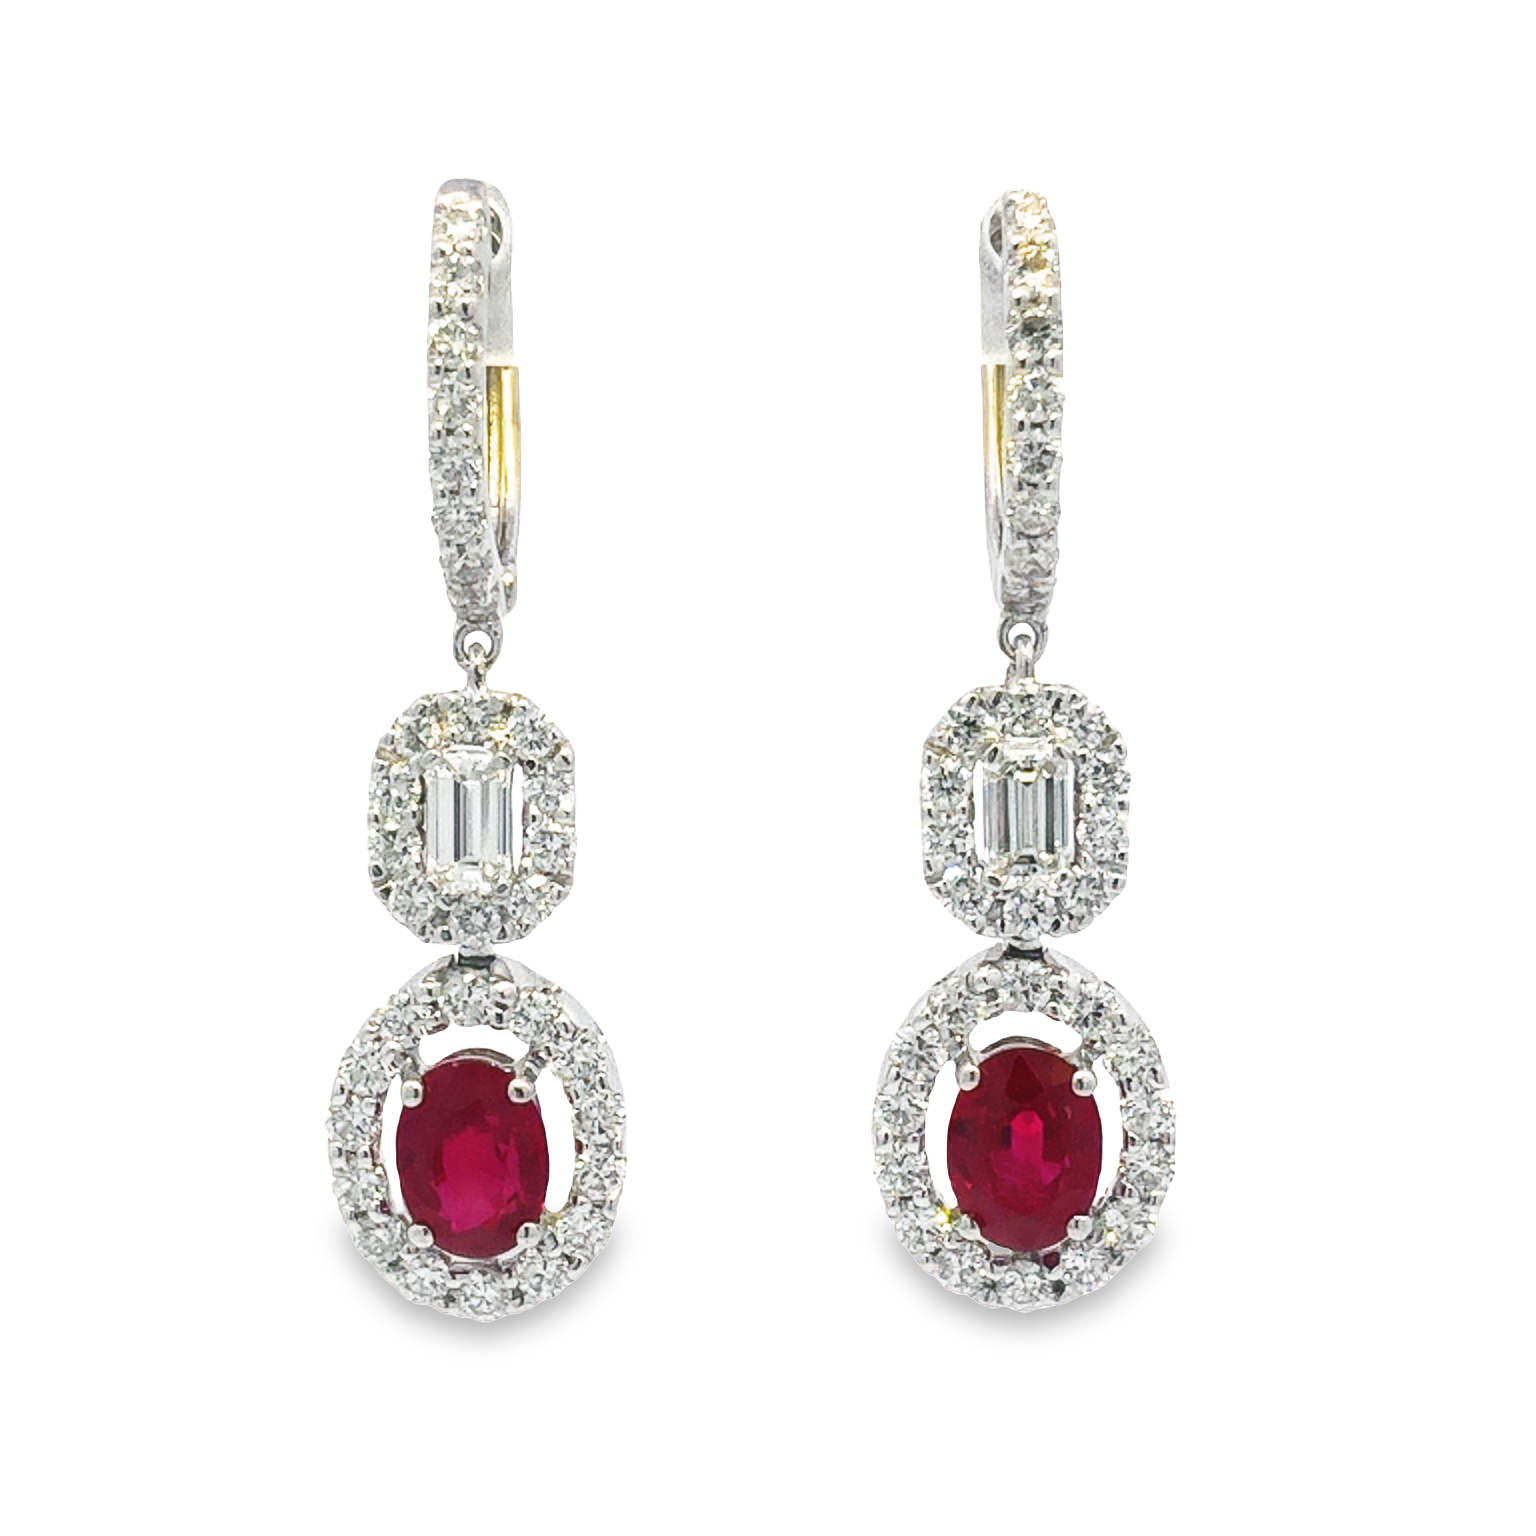 18K White Gold Ruby and Diamond Dangling Earrings with 2 Oval Rubies